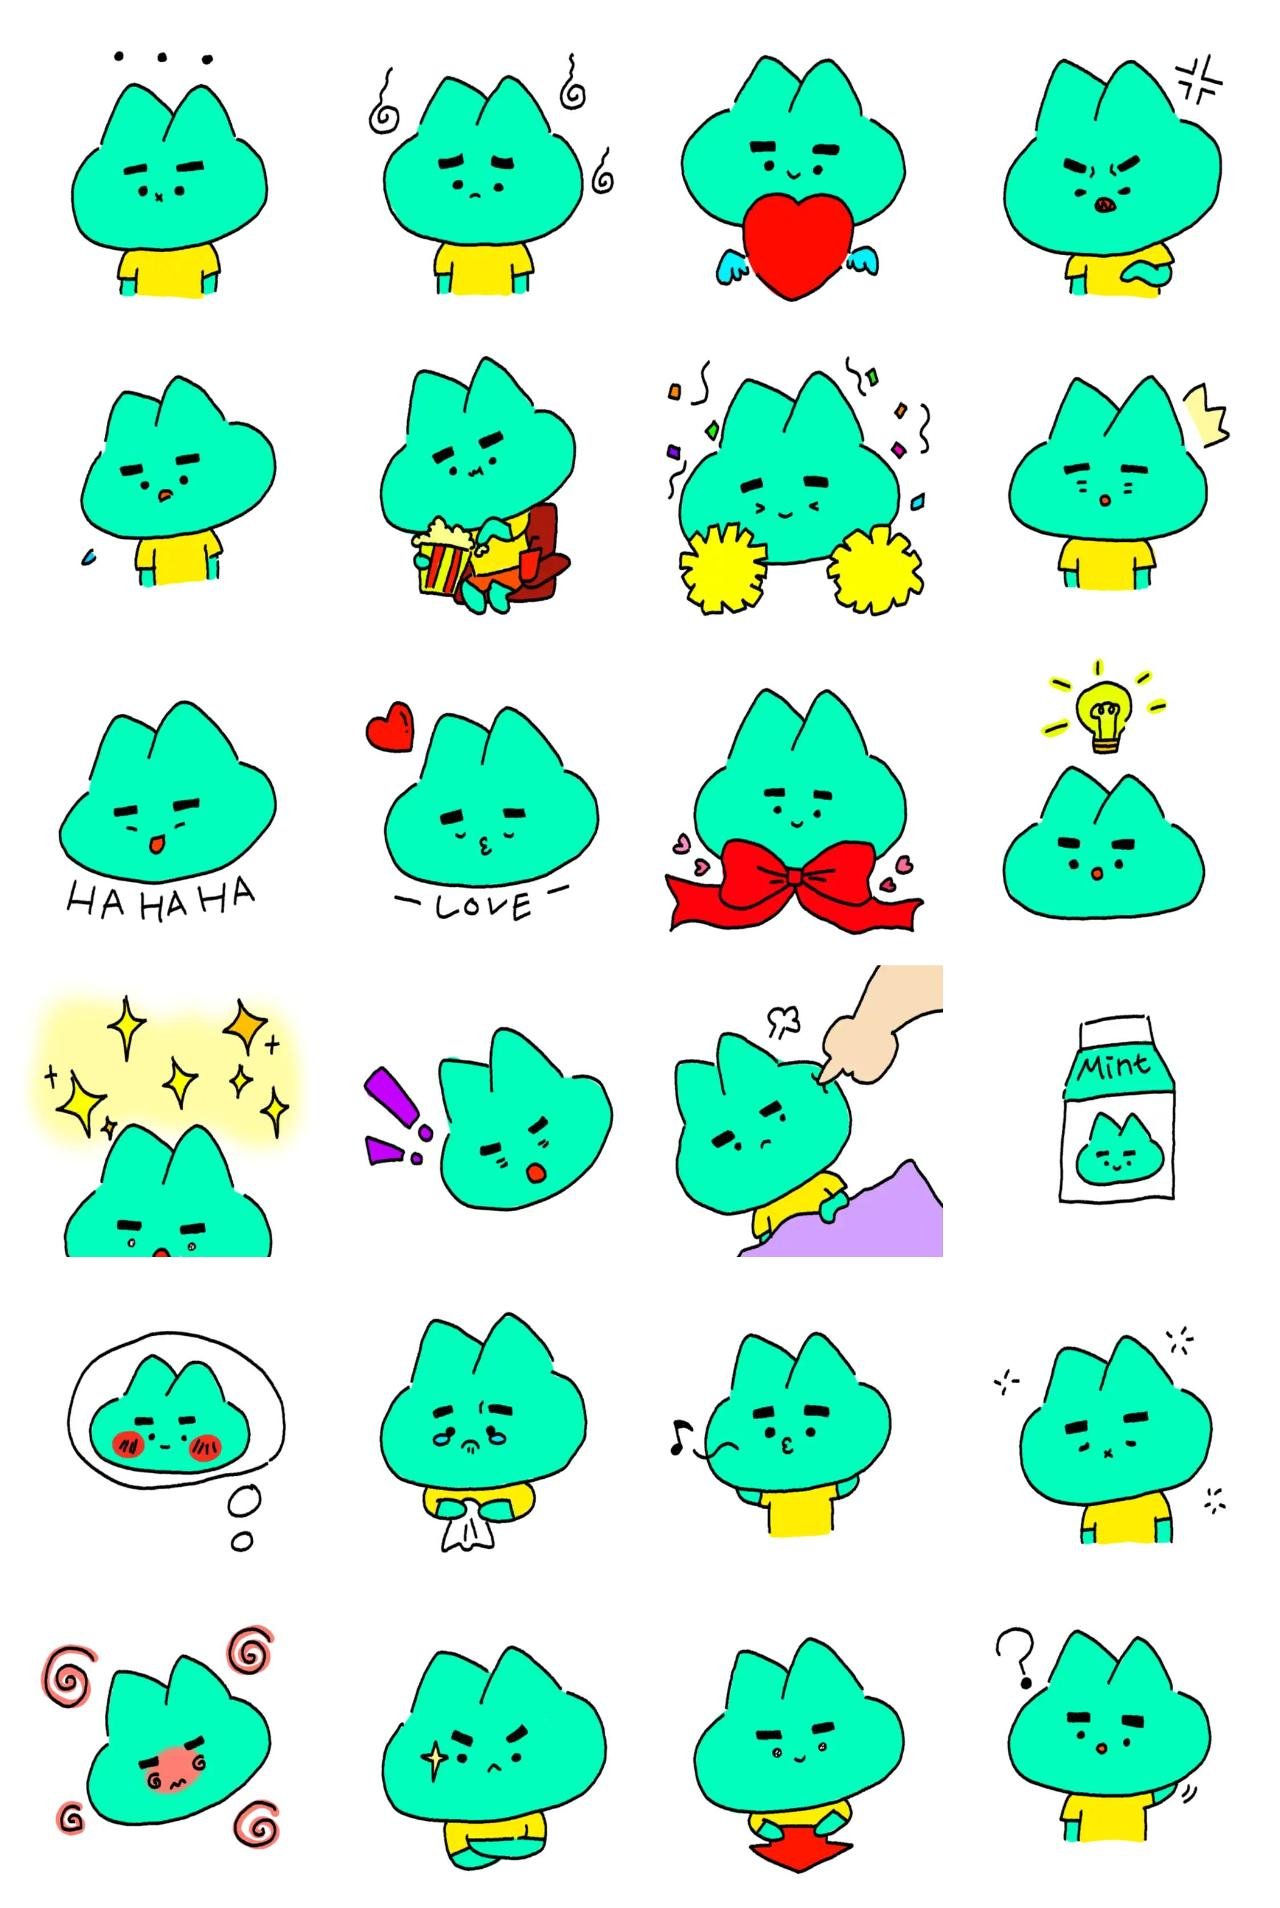 Mint cat Animals sticker pack for Whatsapp, Telegram, Signal, and others chatting and message apps